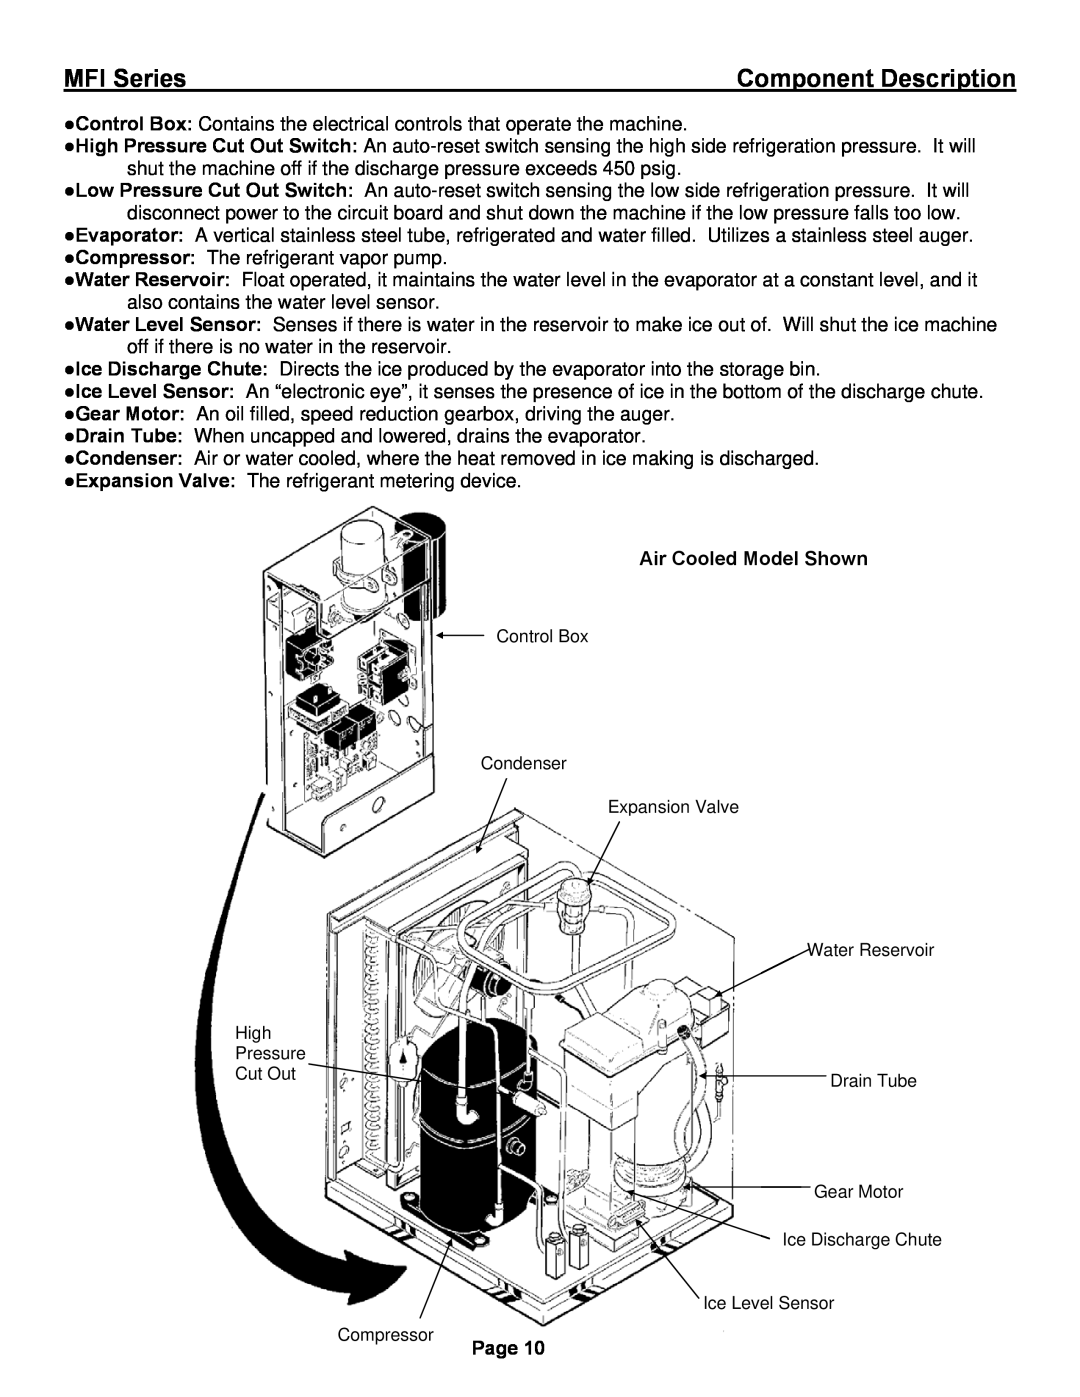 Ice-O-Matic installation manual Component Description, Air Cooled Model Shown, MFI Series, Page 